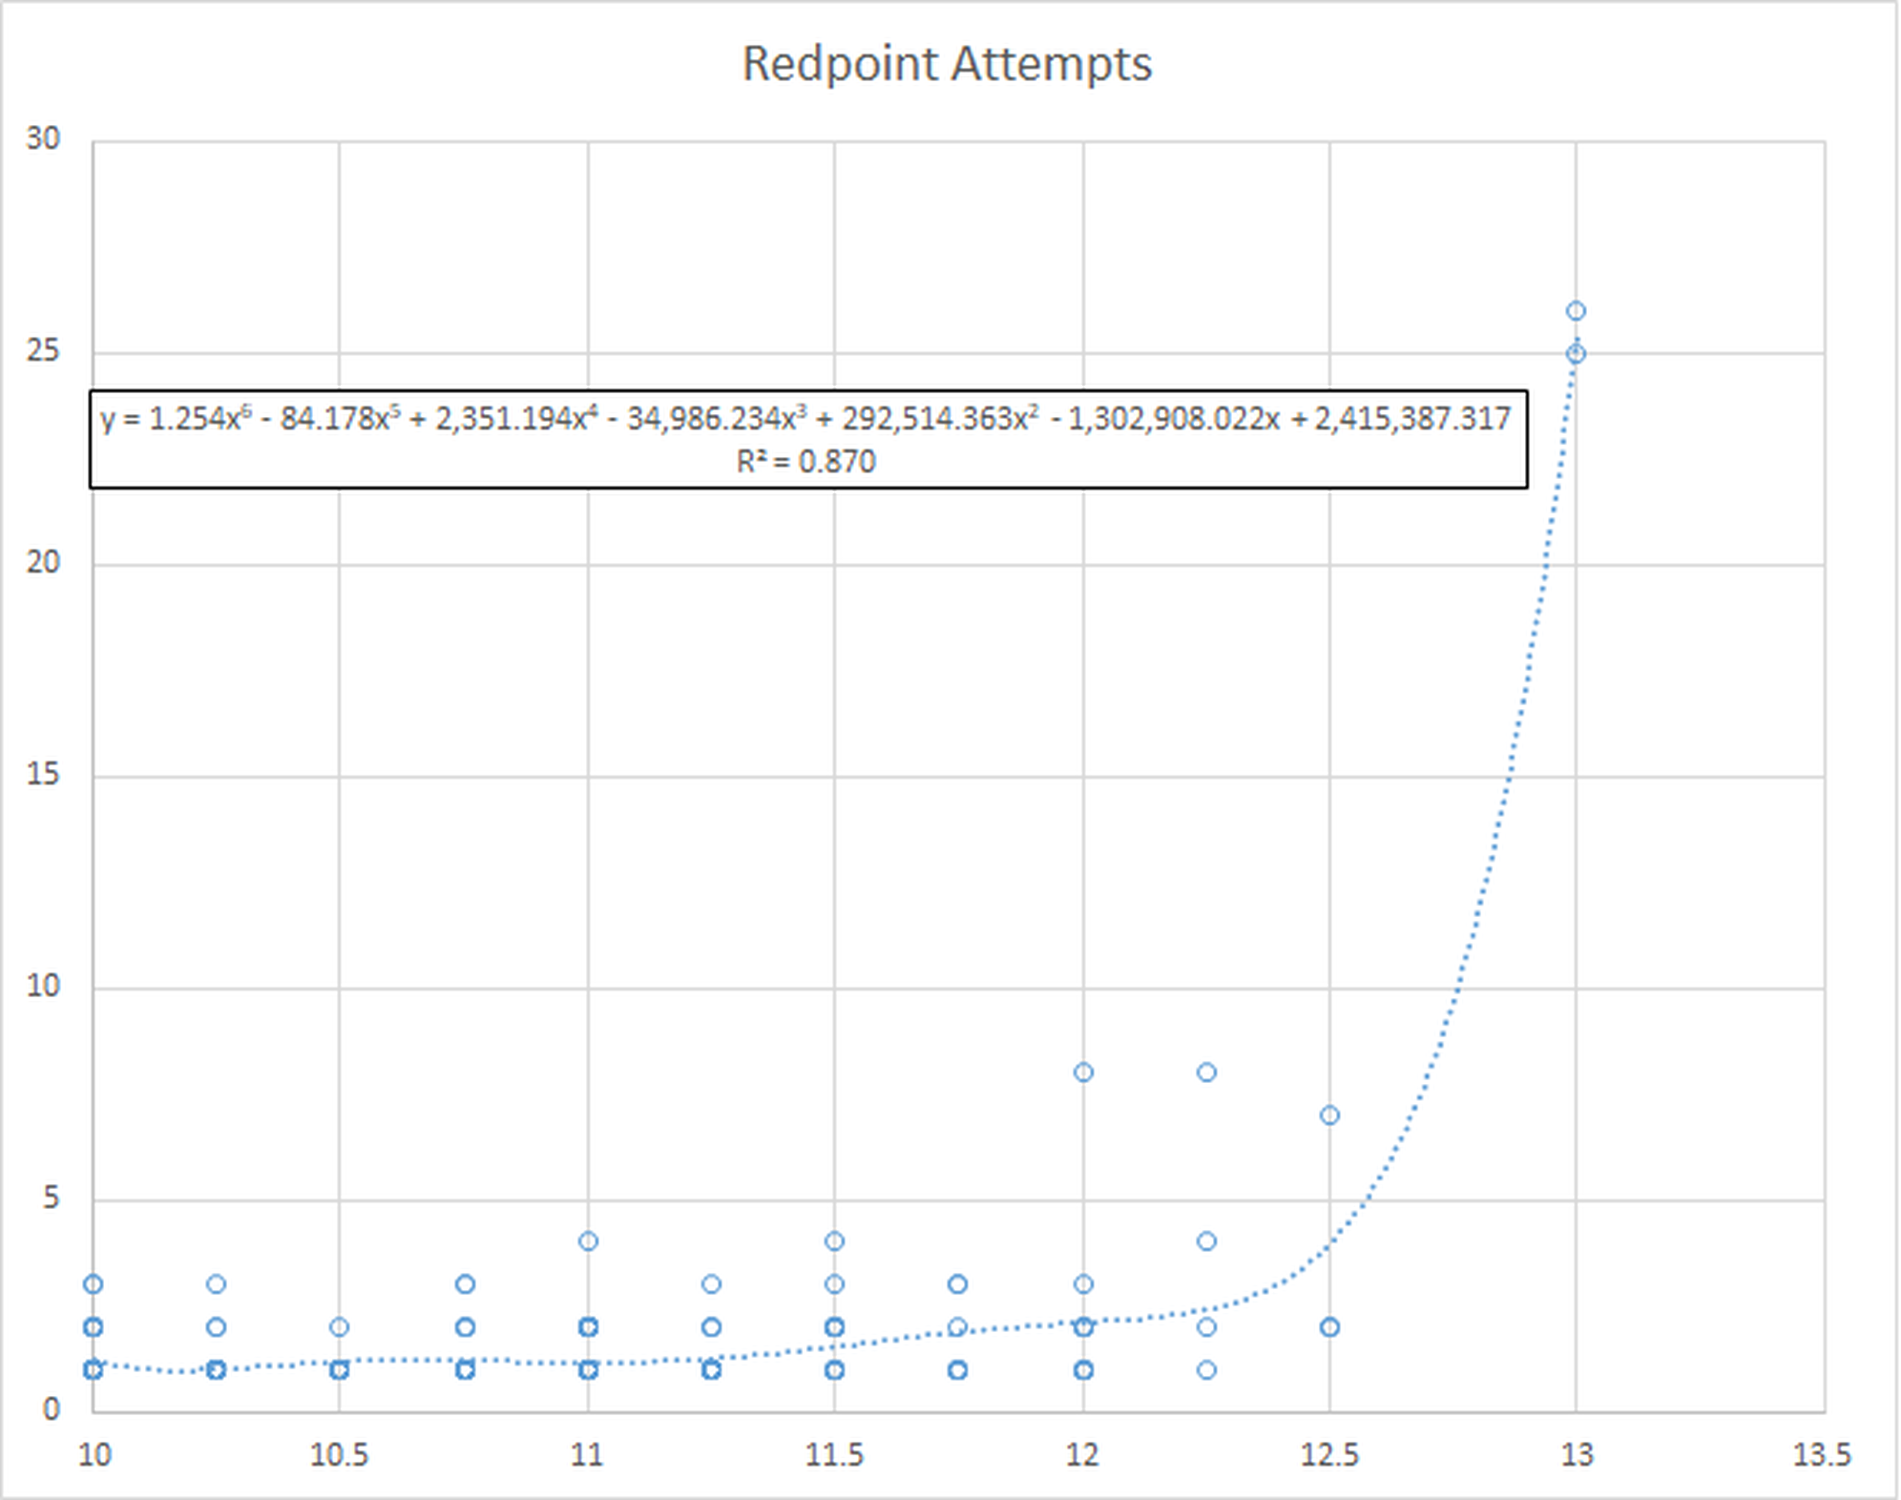 Redpoint attempts, May 2020